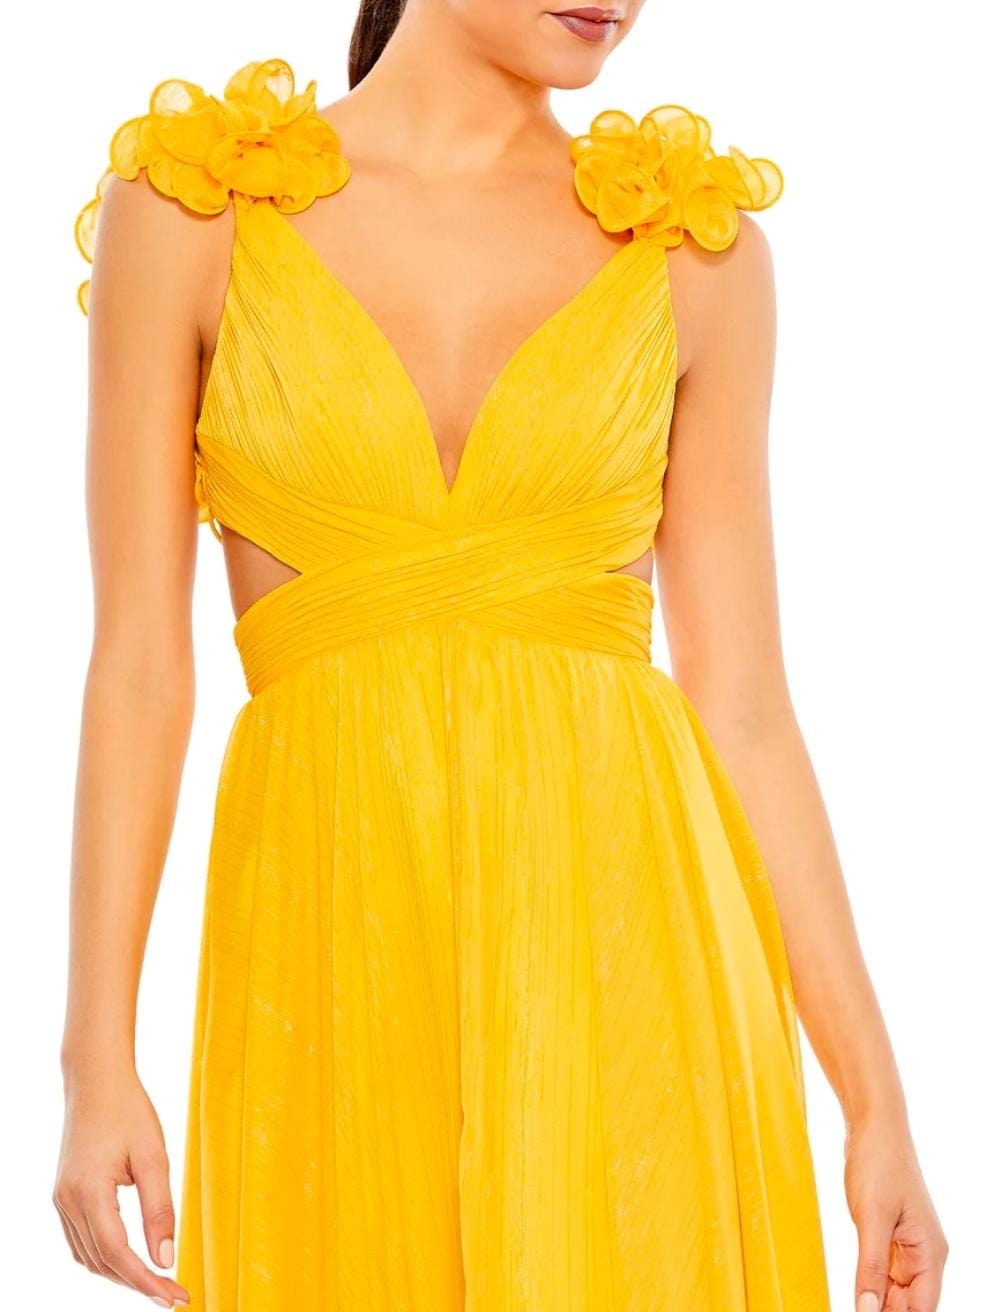 Ruffled Tiered Cut-Out Yellow Gown